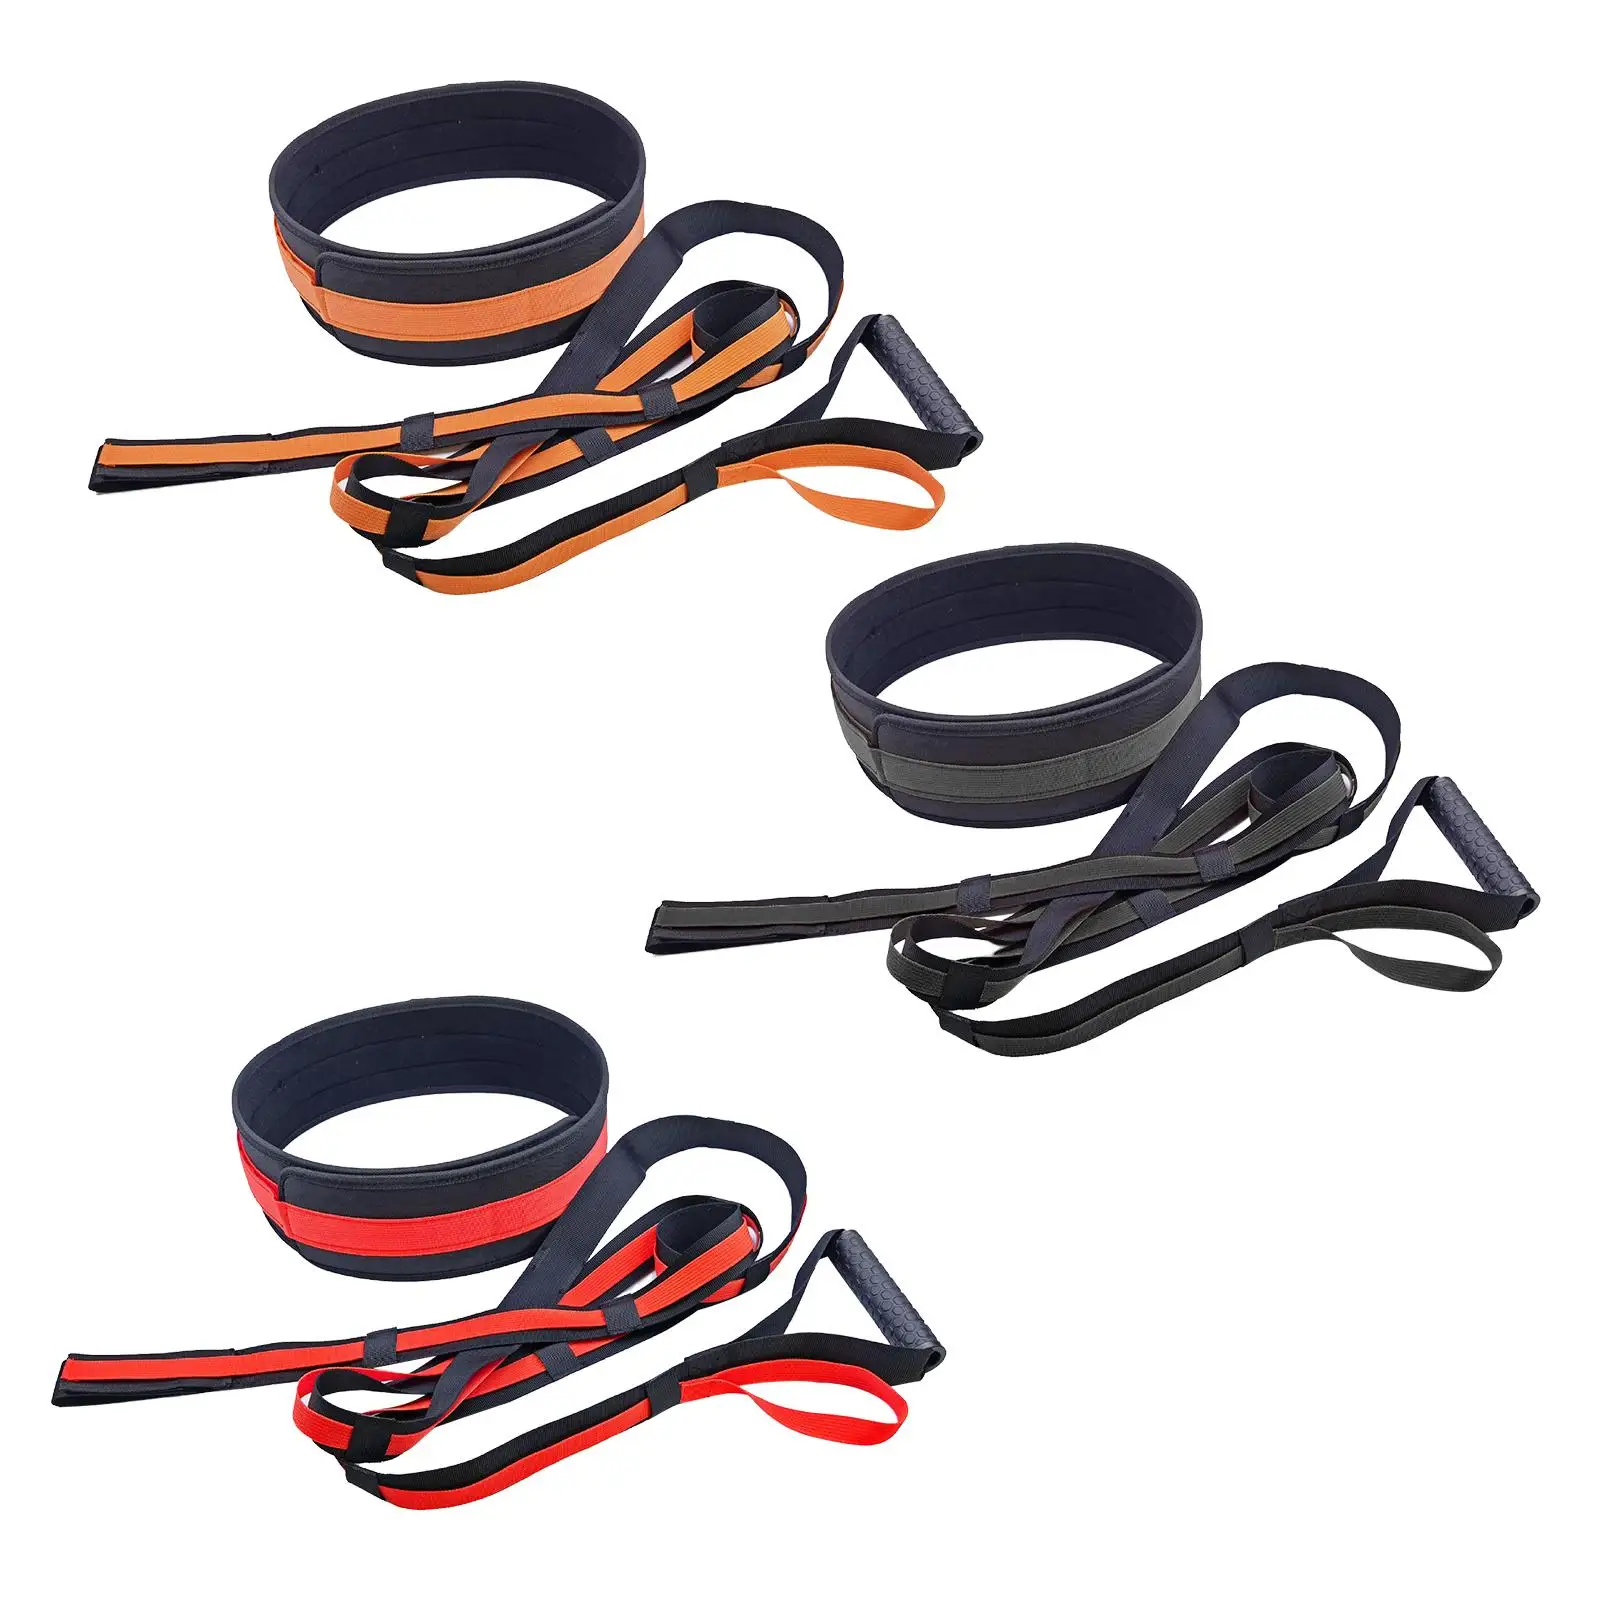 Resistance Running Bungee Band Improve Strength for Soccer Workout Football